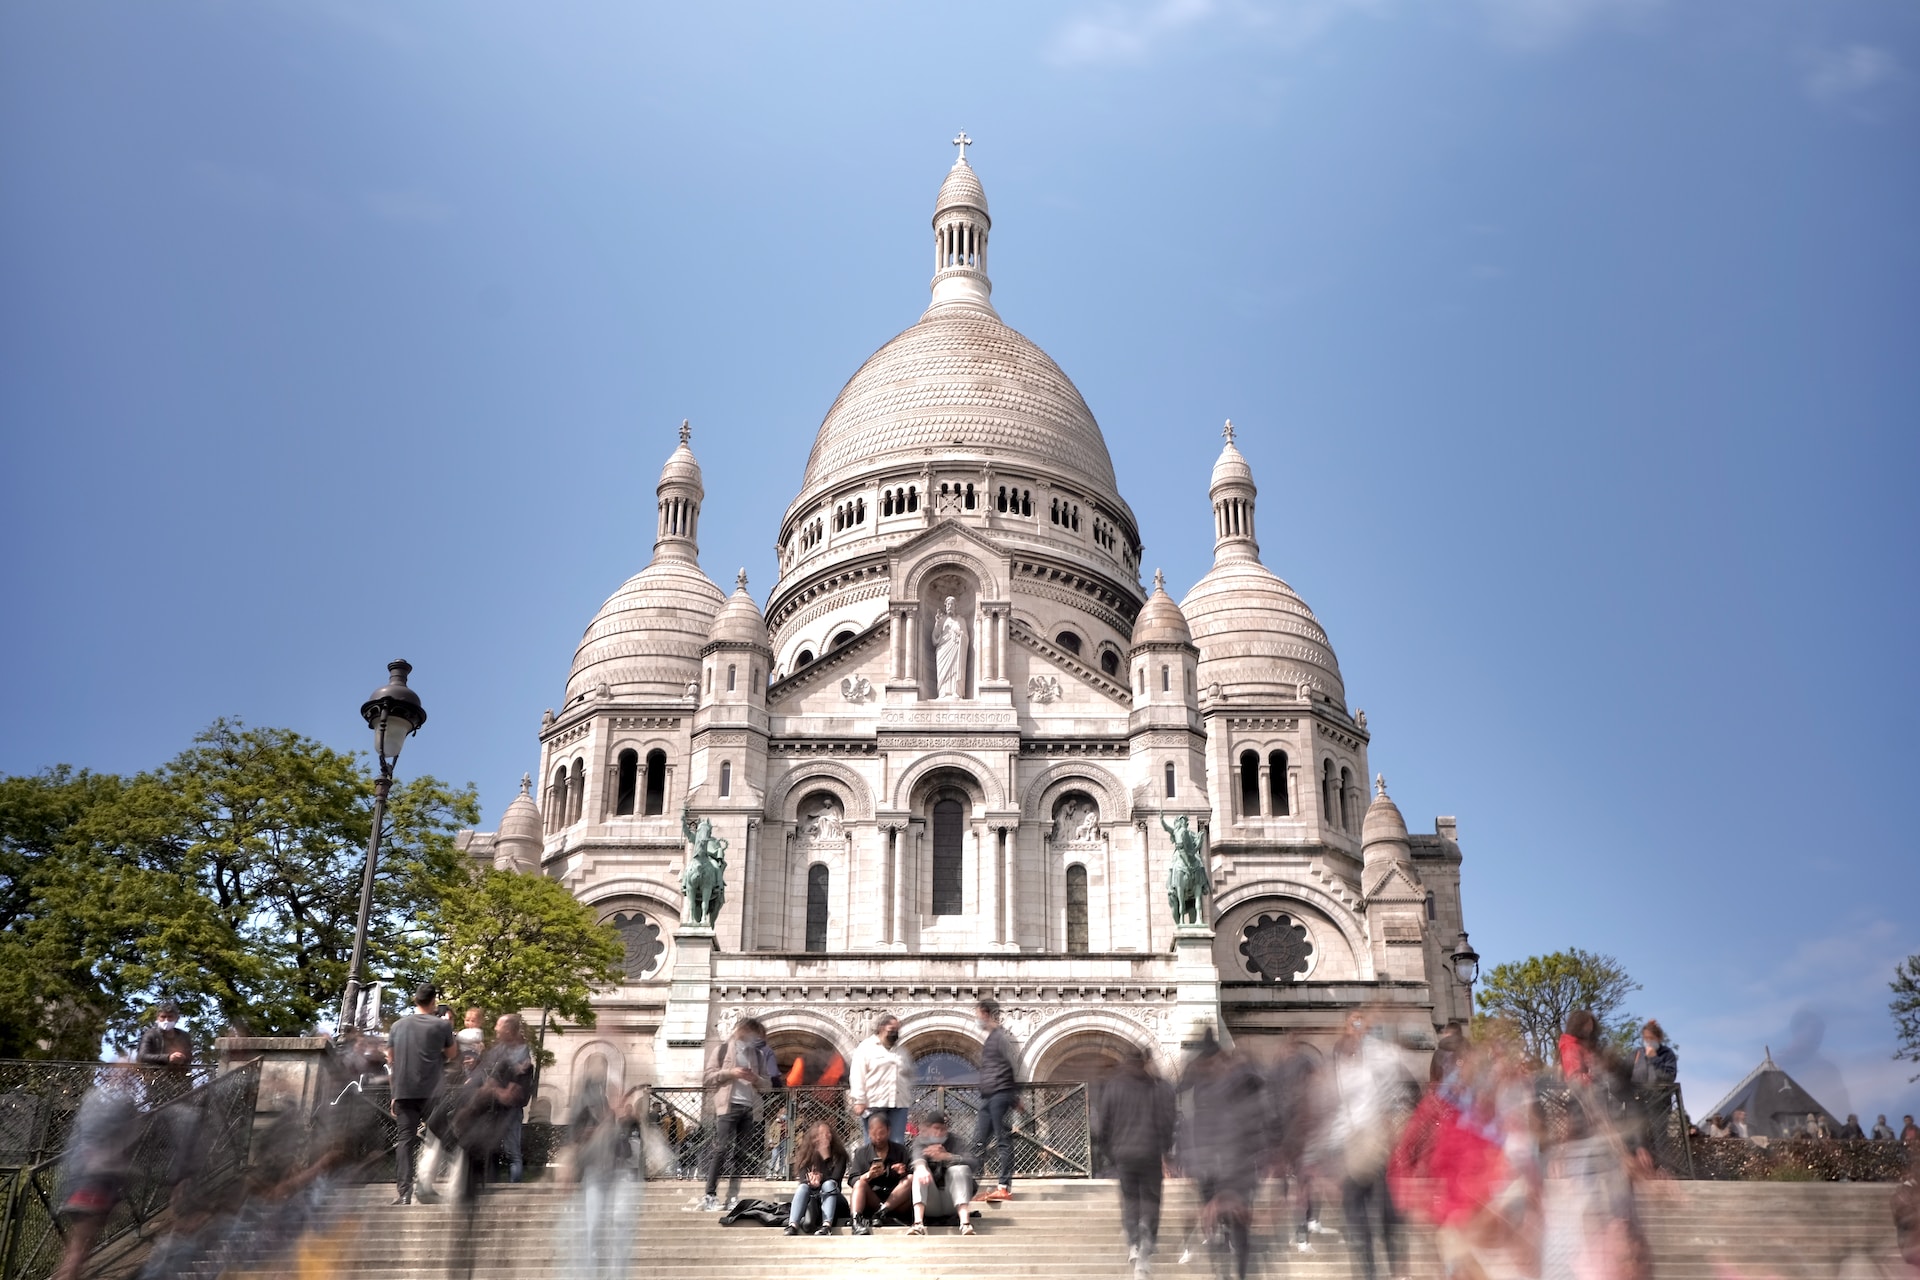 Overlooked and Underrated Attractions in Paris